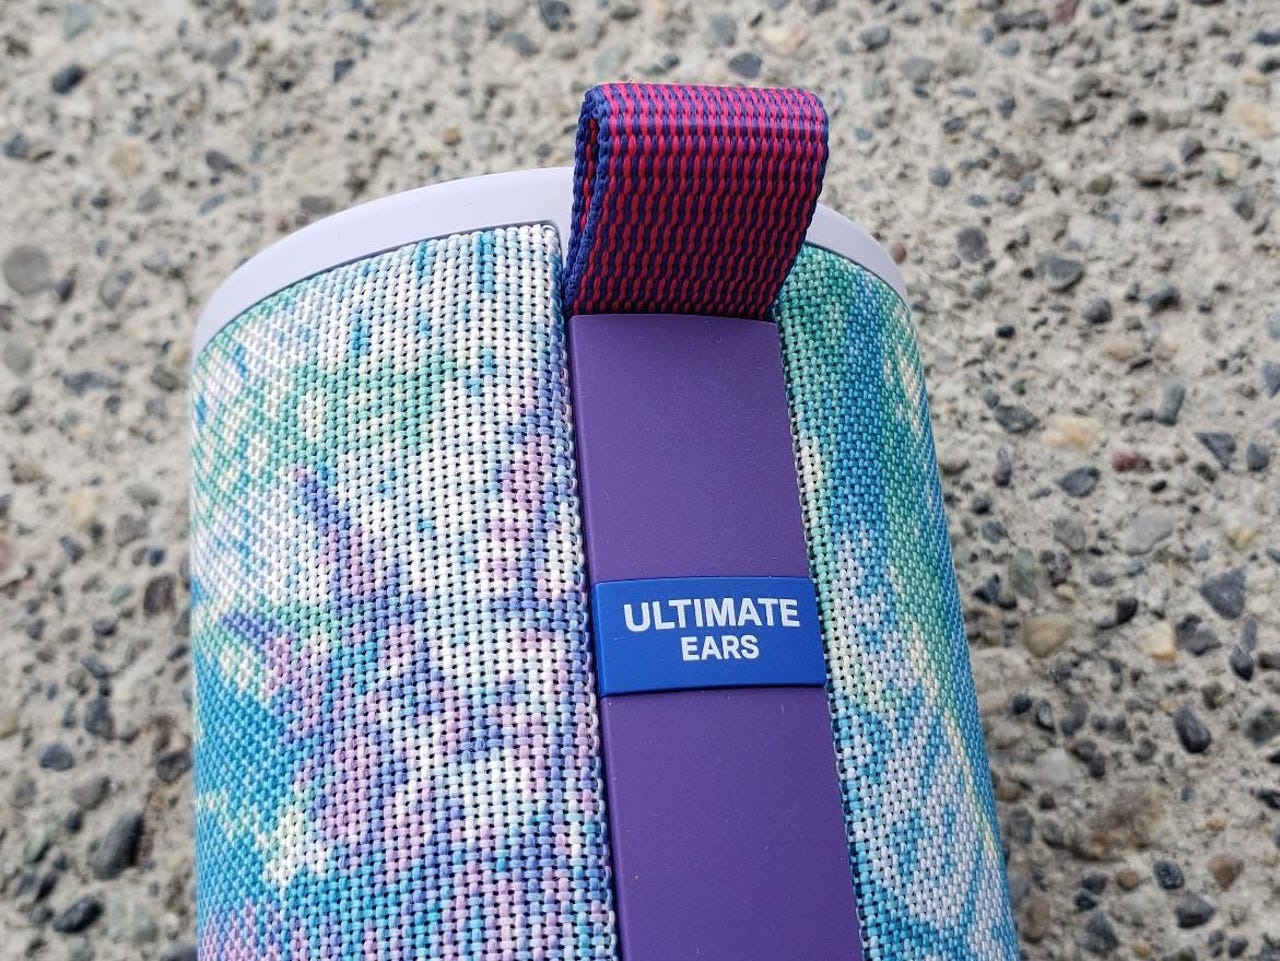 Ultimate Ears Boom 3 review: Speakers that come with a 'magic